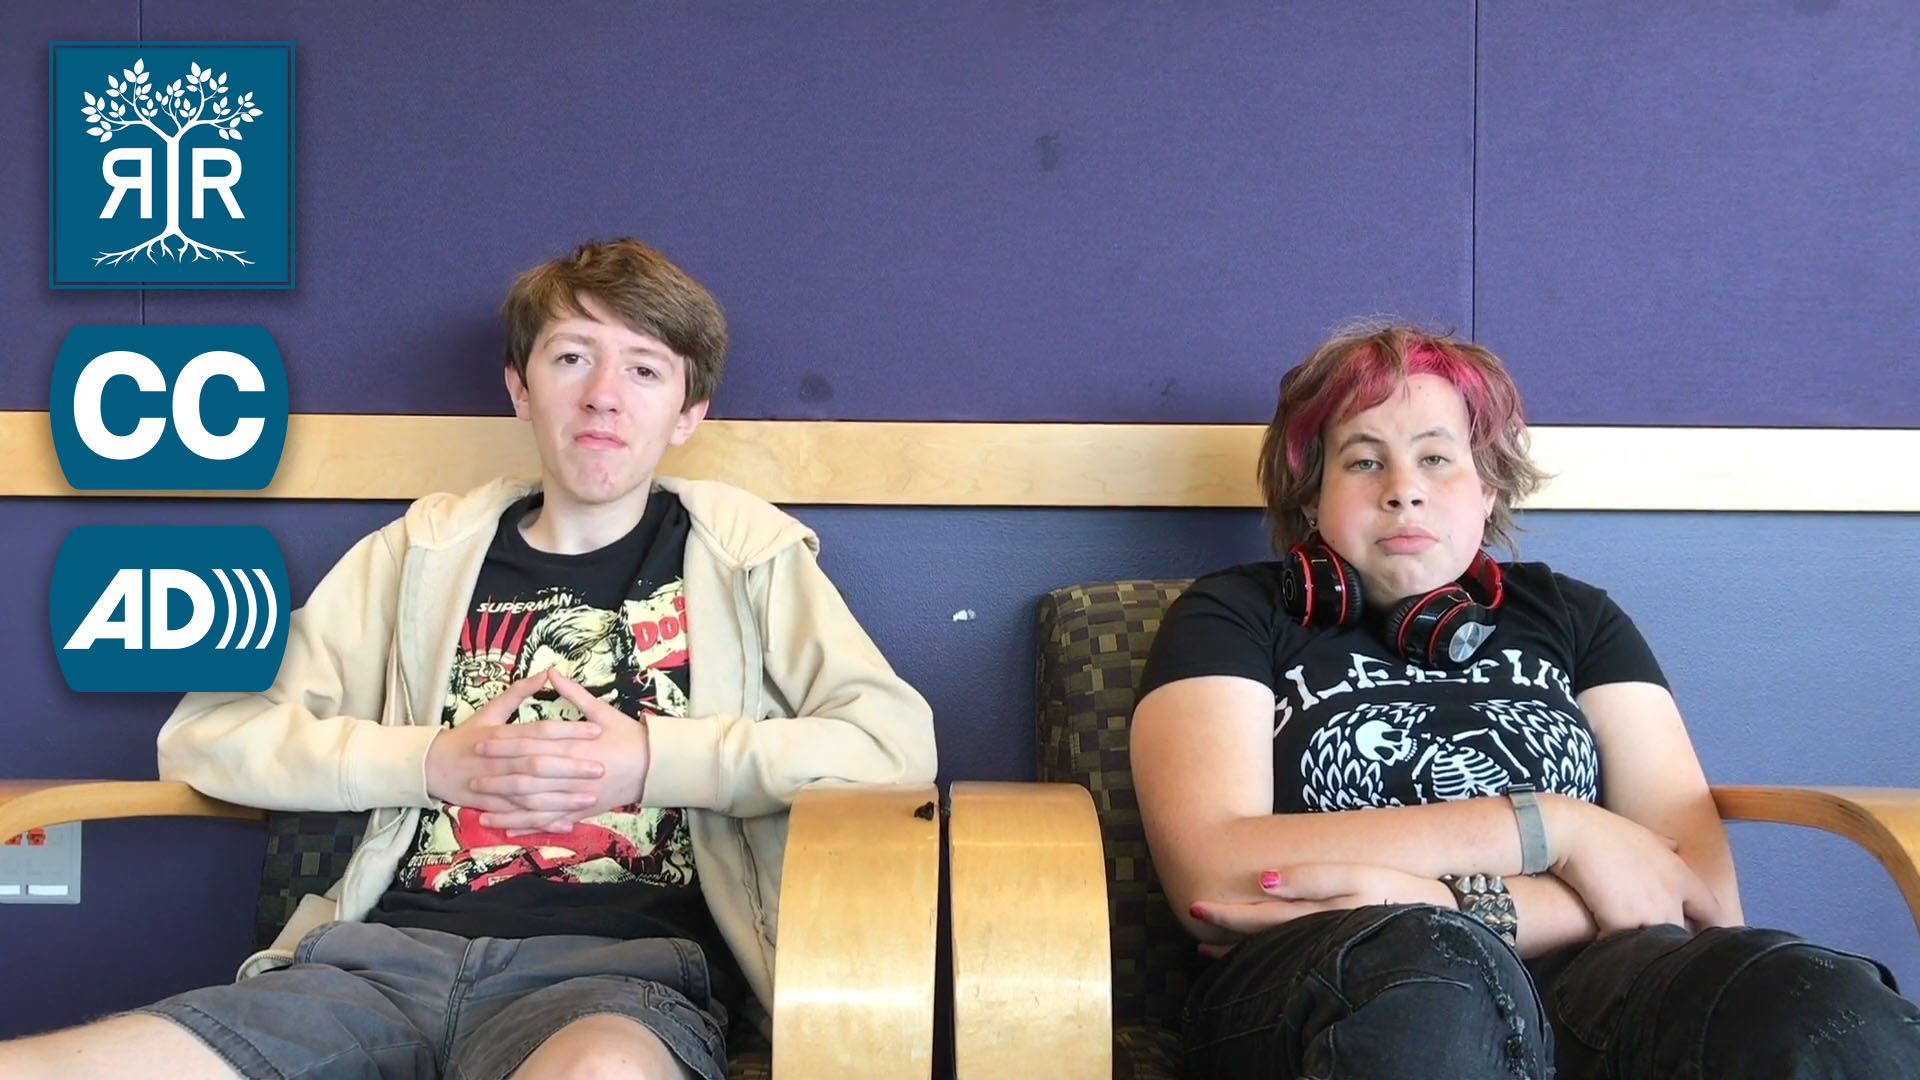 Two students sit in chairs facing the camera